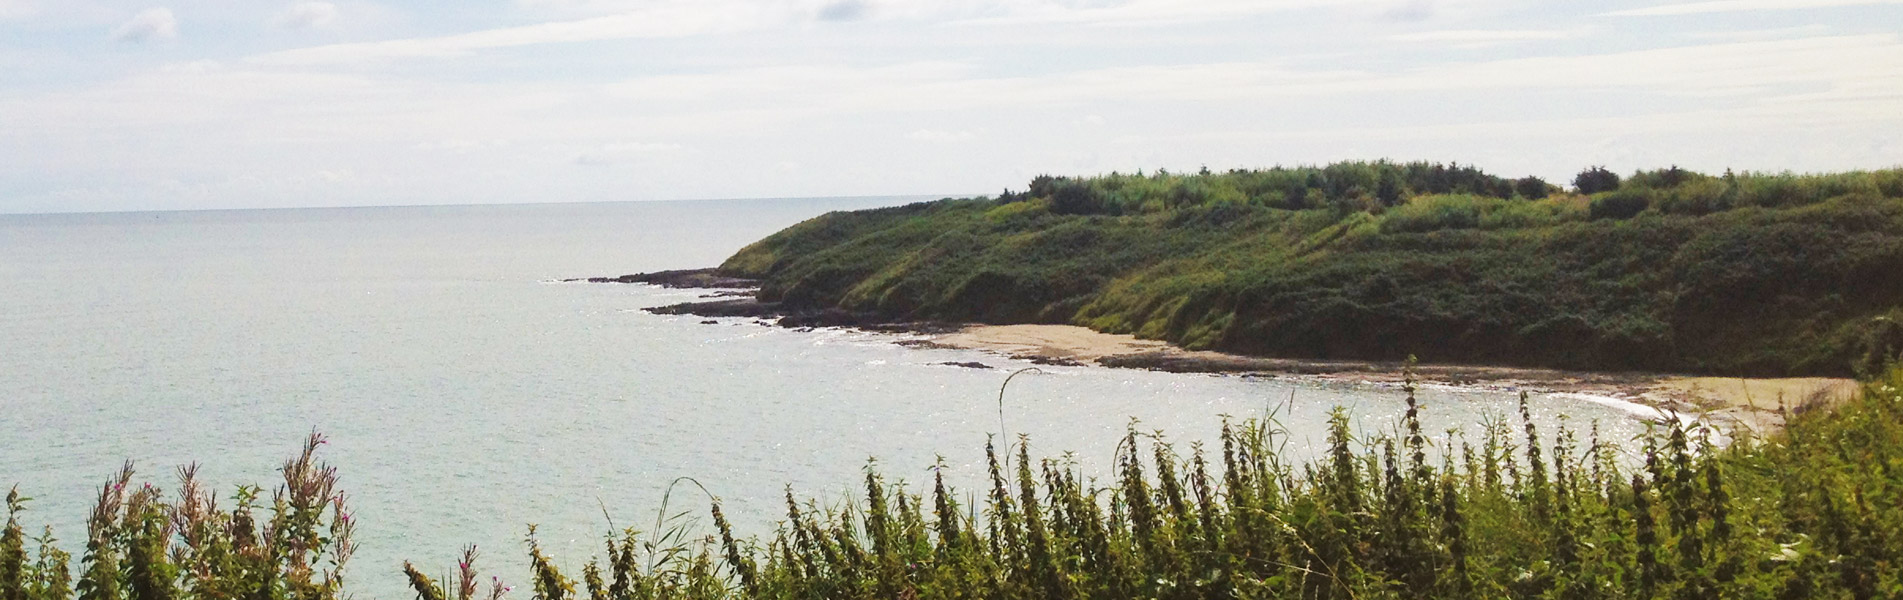 Gleeson's Holiday Park is located right beside Clogga beach.